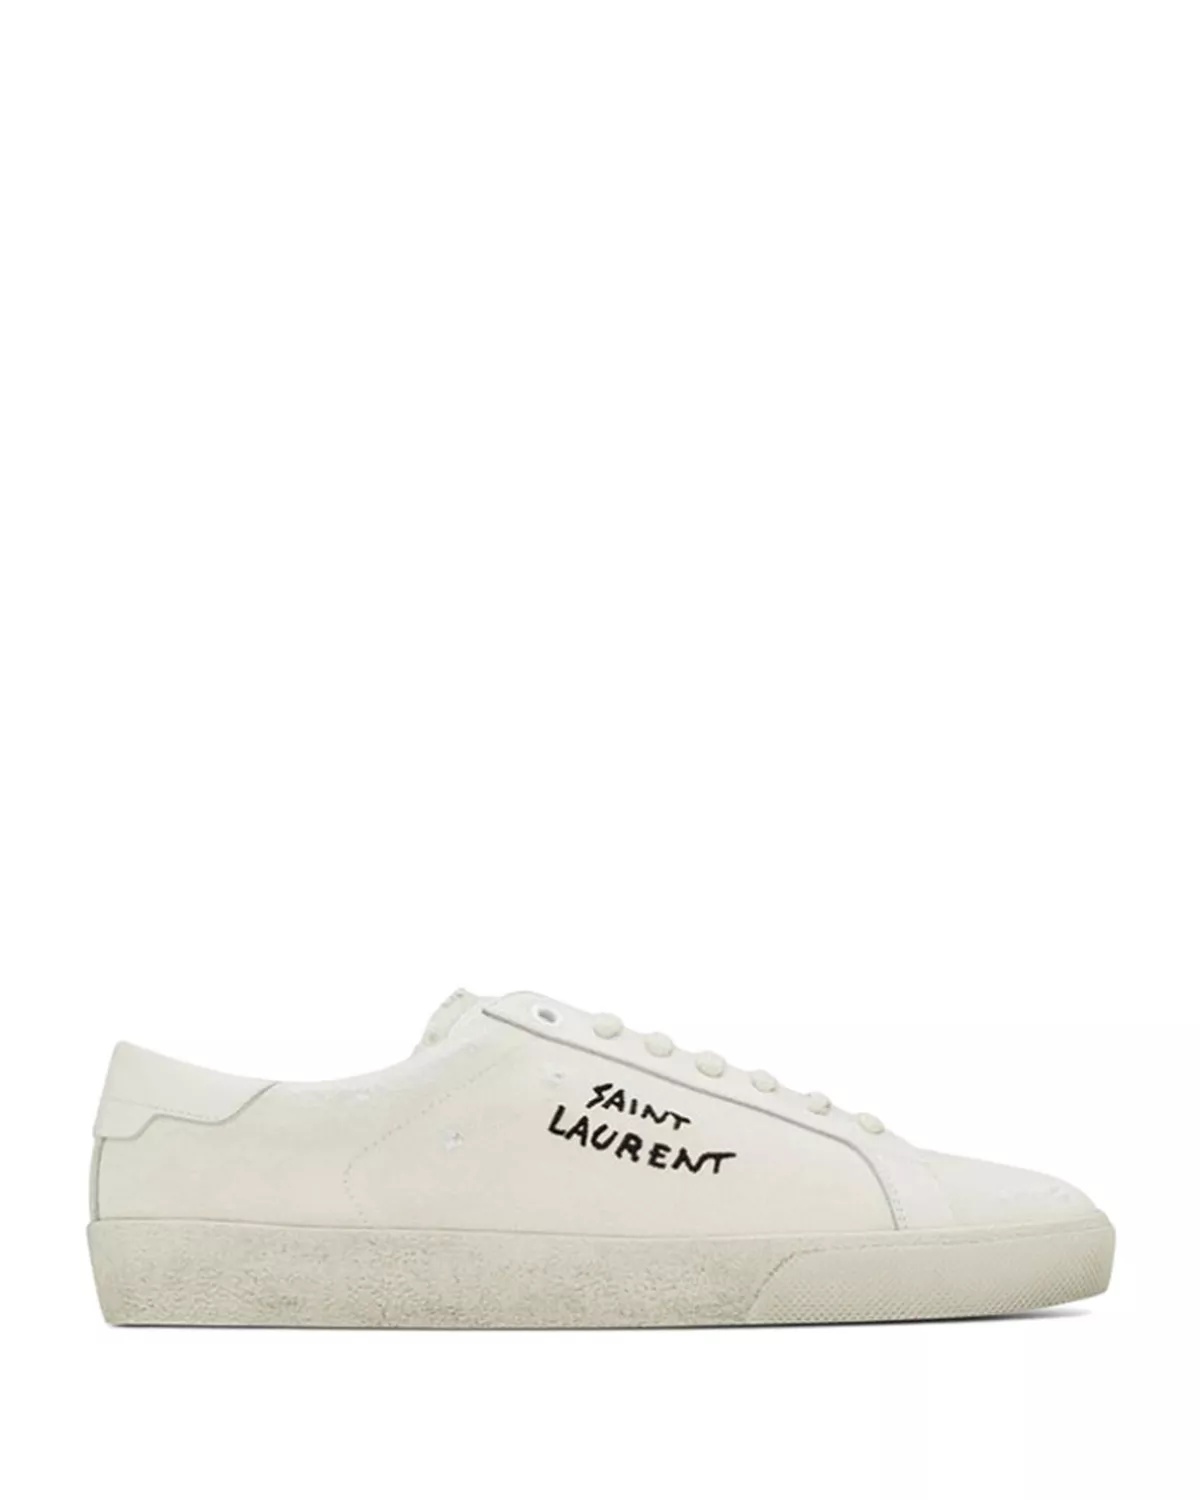 Court Classic Sl/06 Embroidered Sneakers in Canvas and Leather - 1